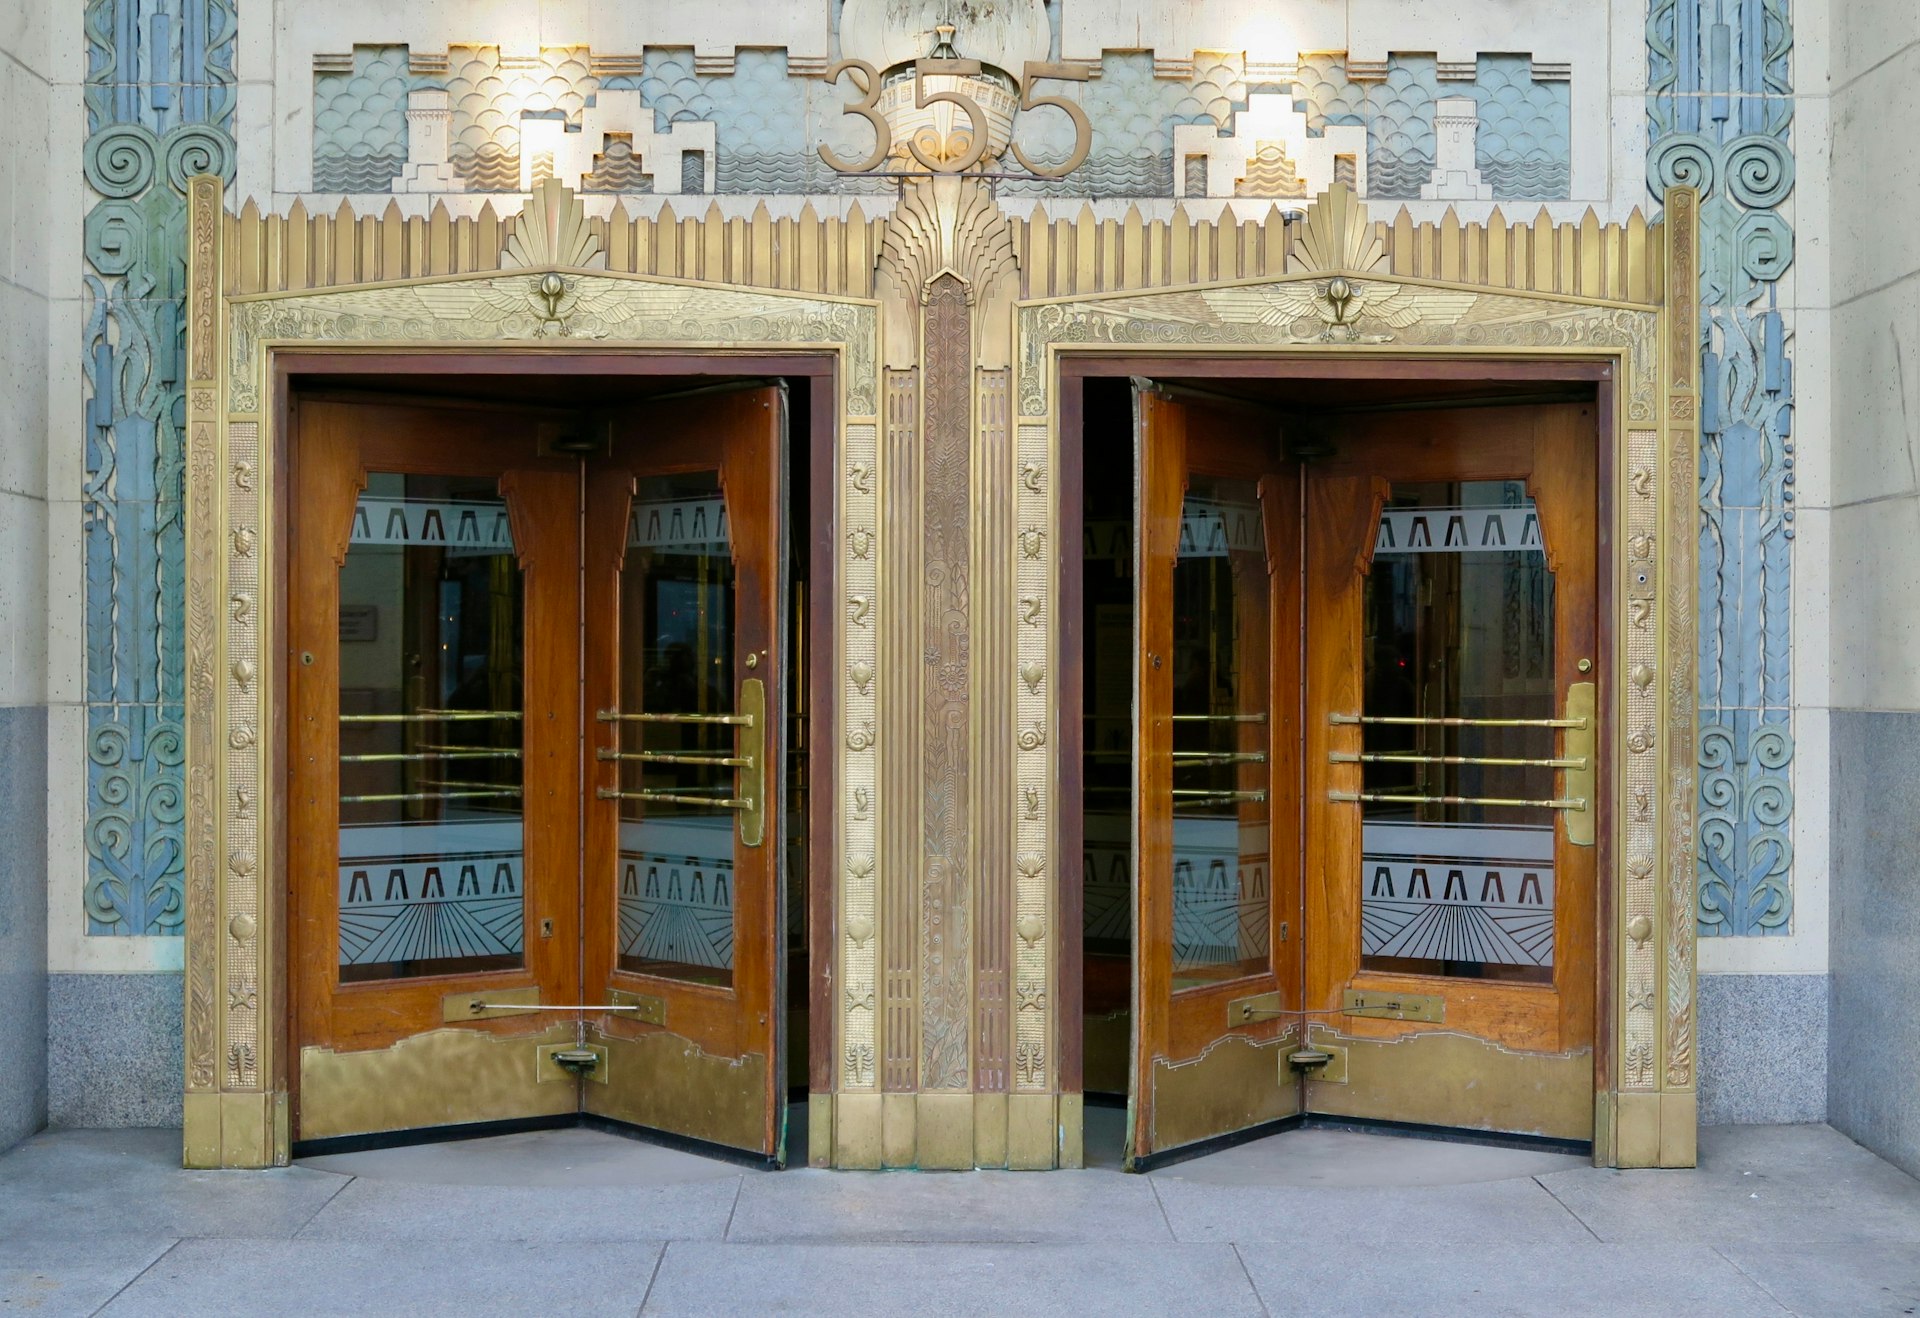 Art deco architecture of the Marine Building in Vancouver, Canada